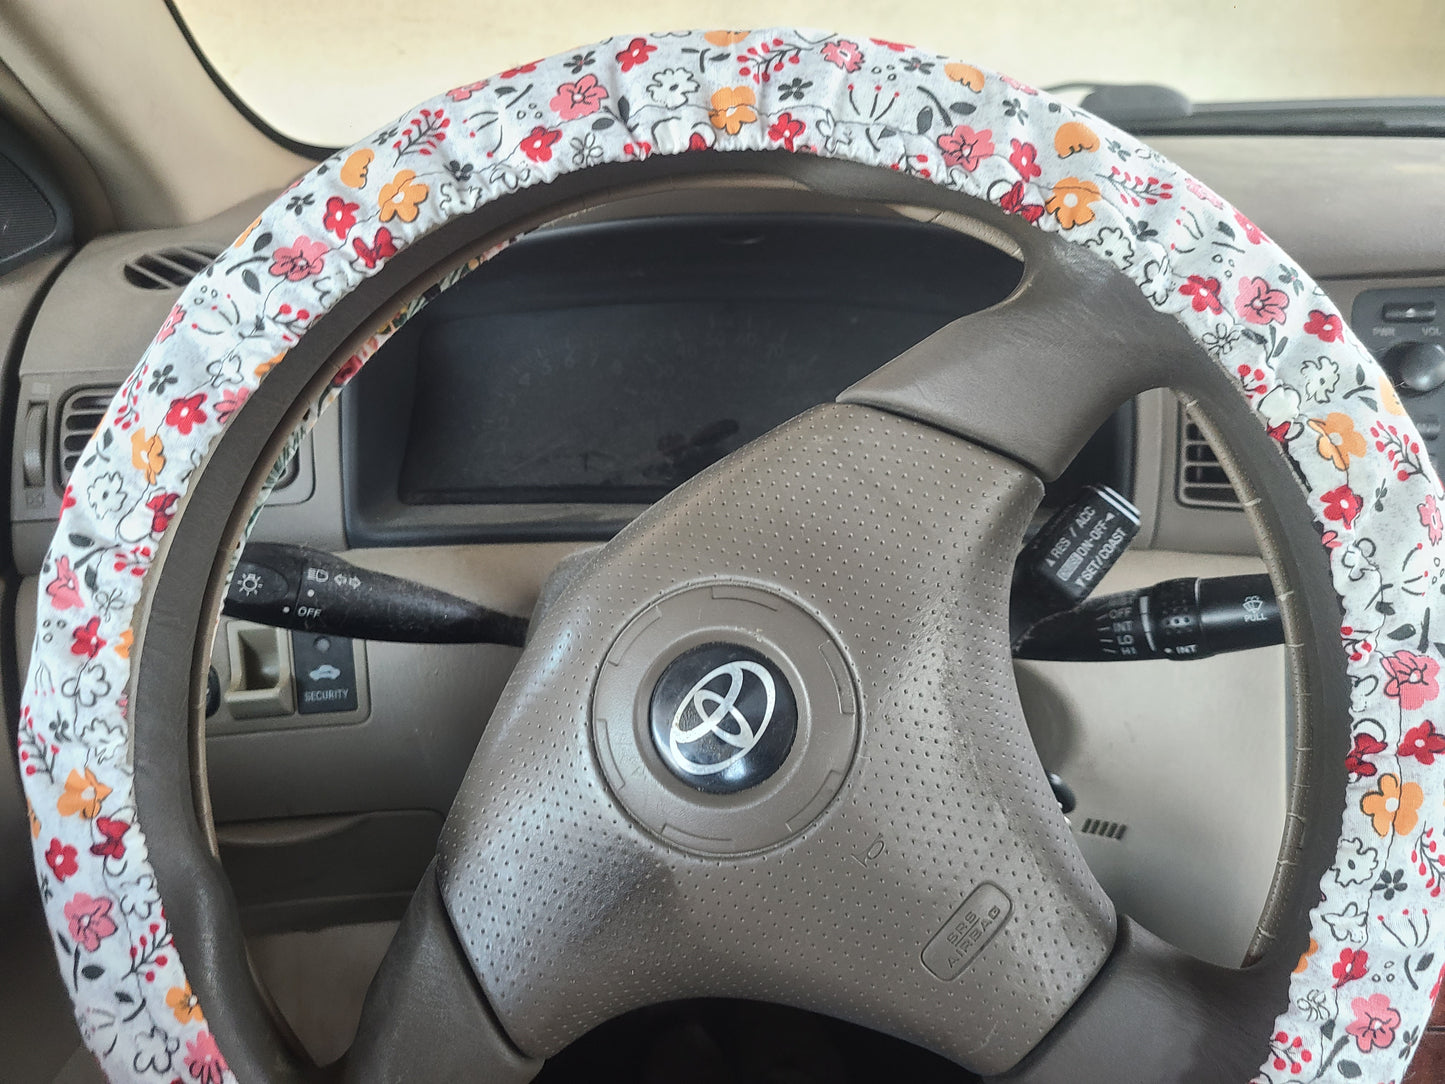 Floral Mouse Steering Wheel Cover made with Licensed Disney Fabric